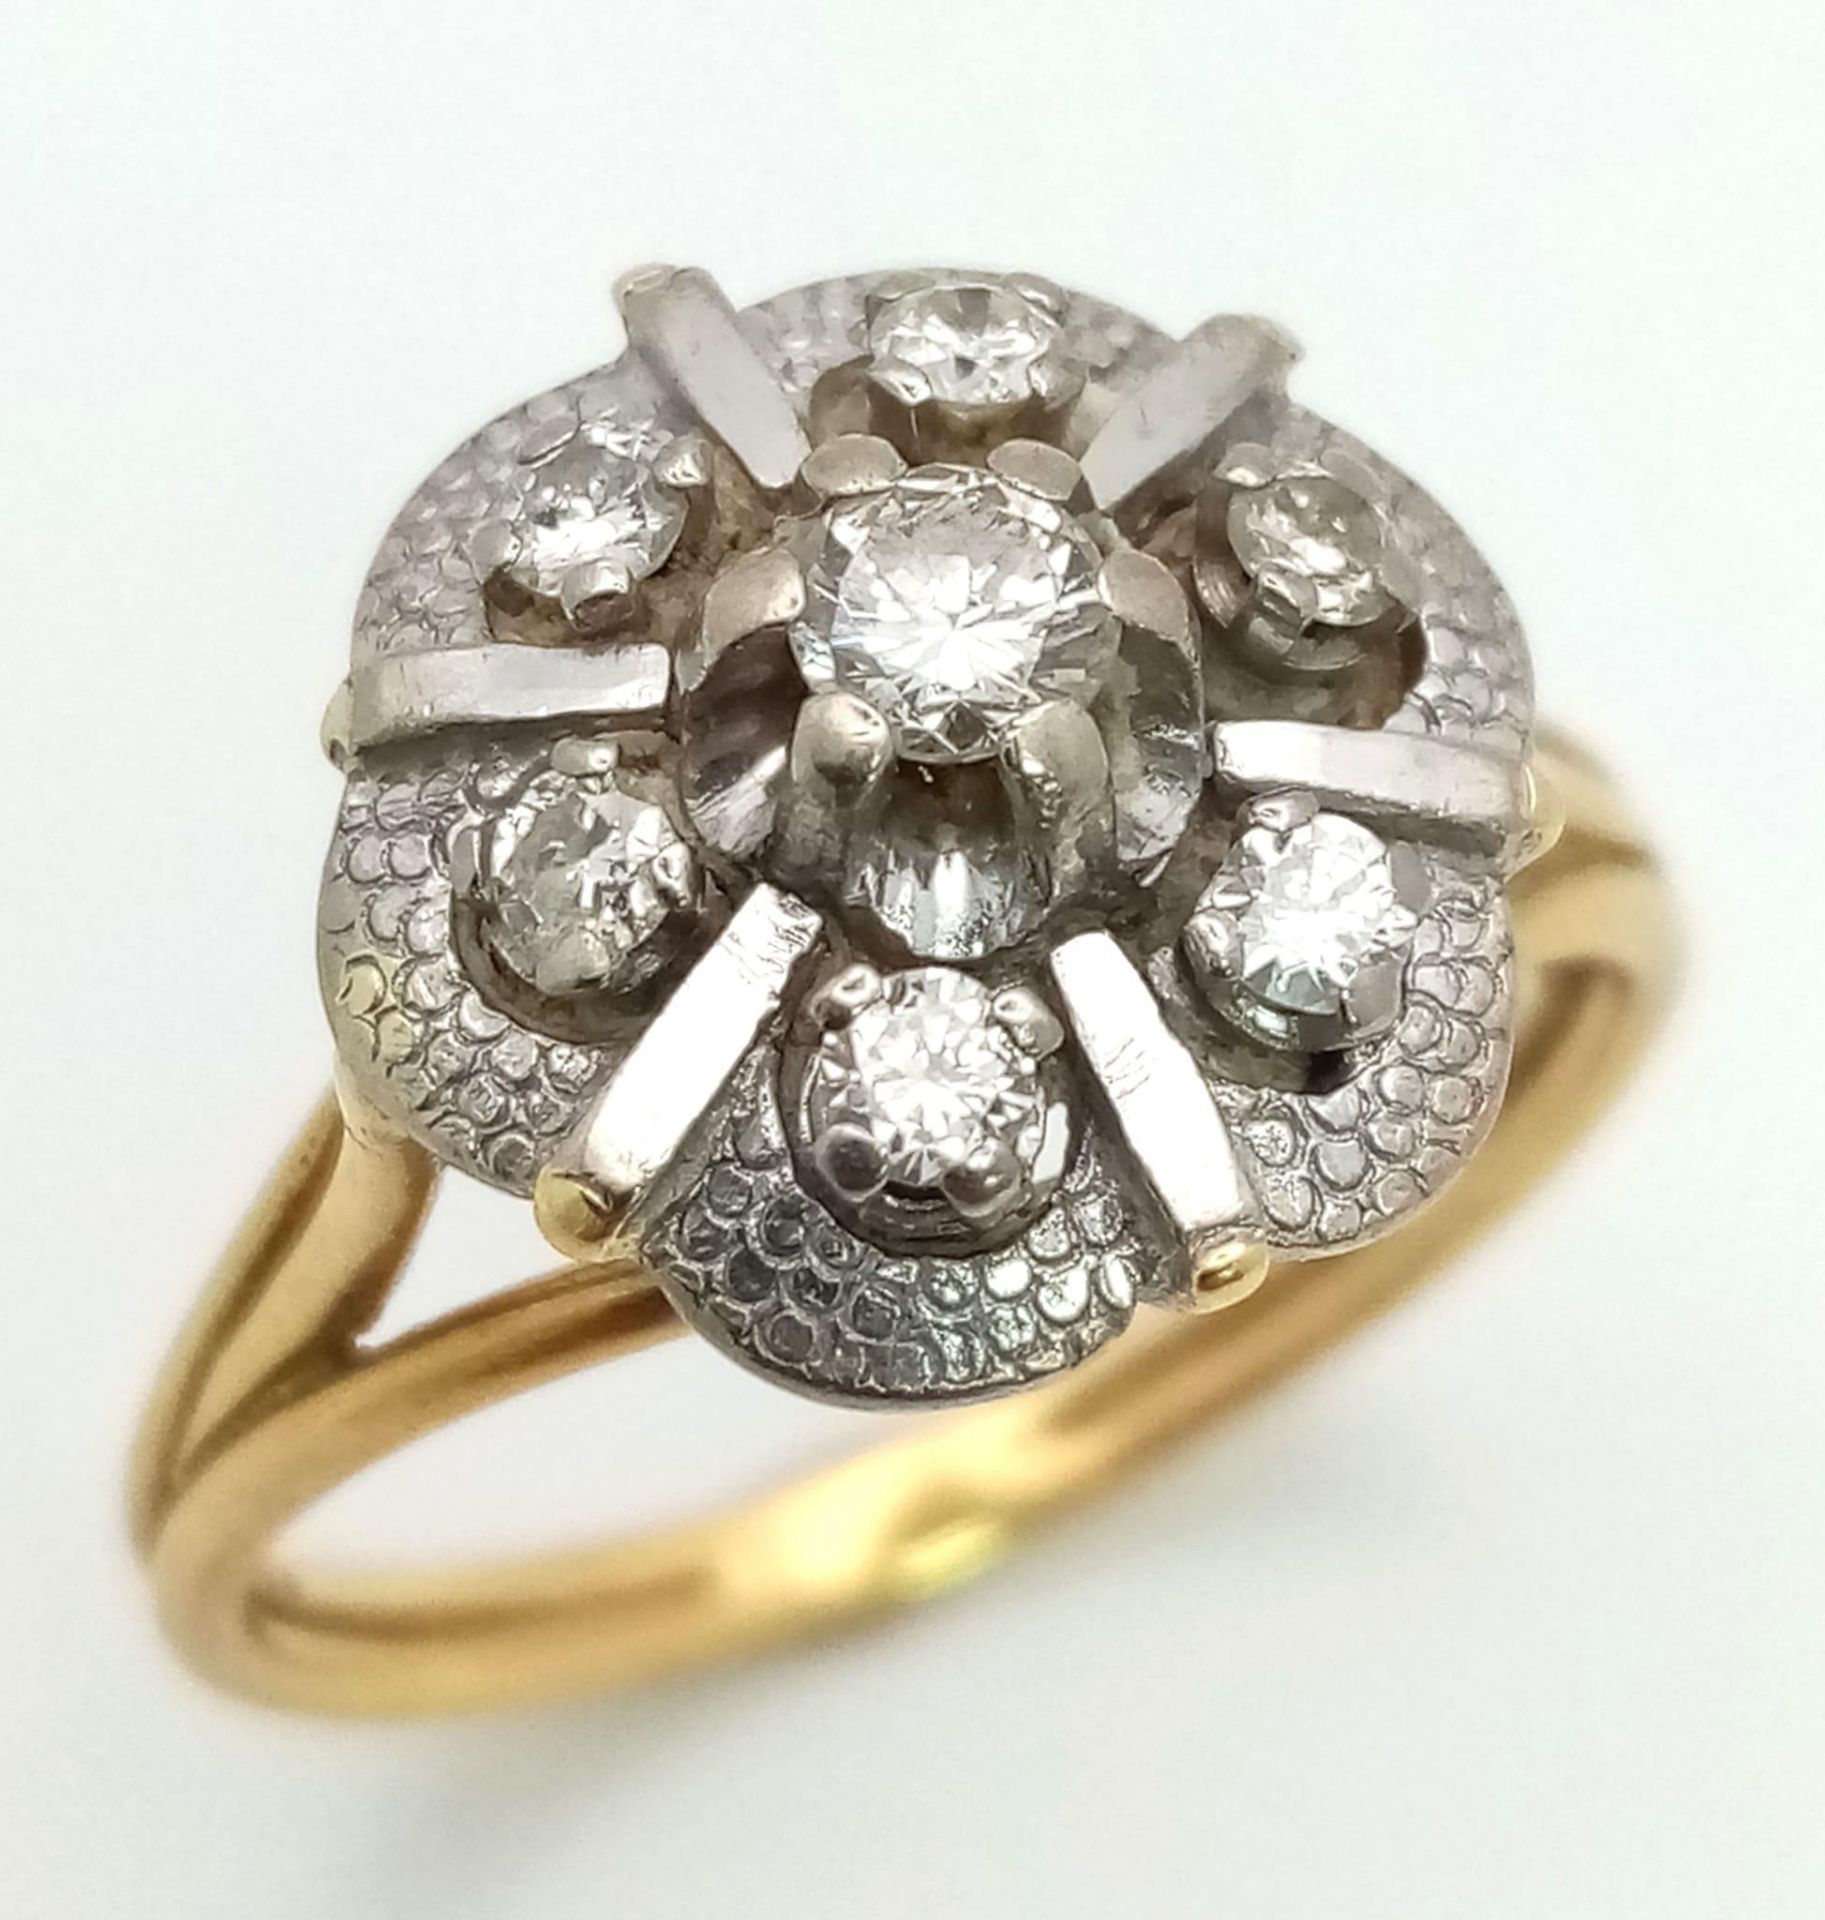 A Vintage 18K Yellow Gold and Diamond Floral Ring. Central petal-cut diamond surrounded by a halo of